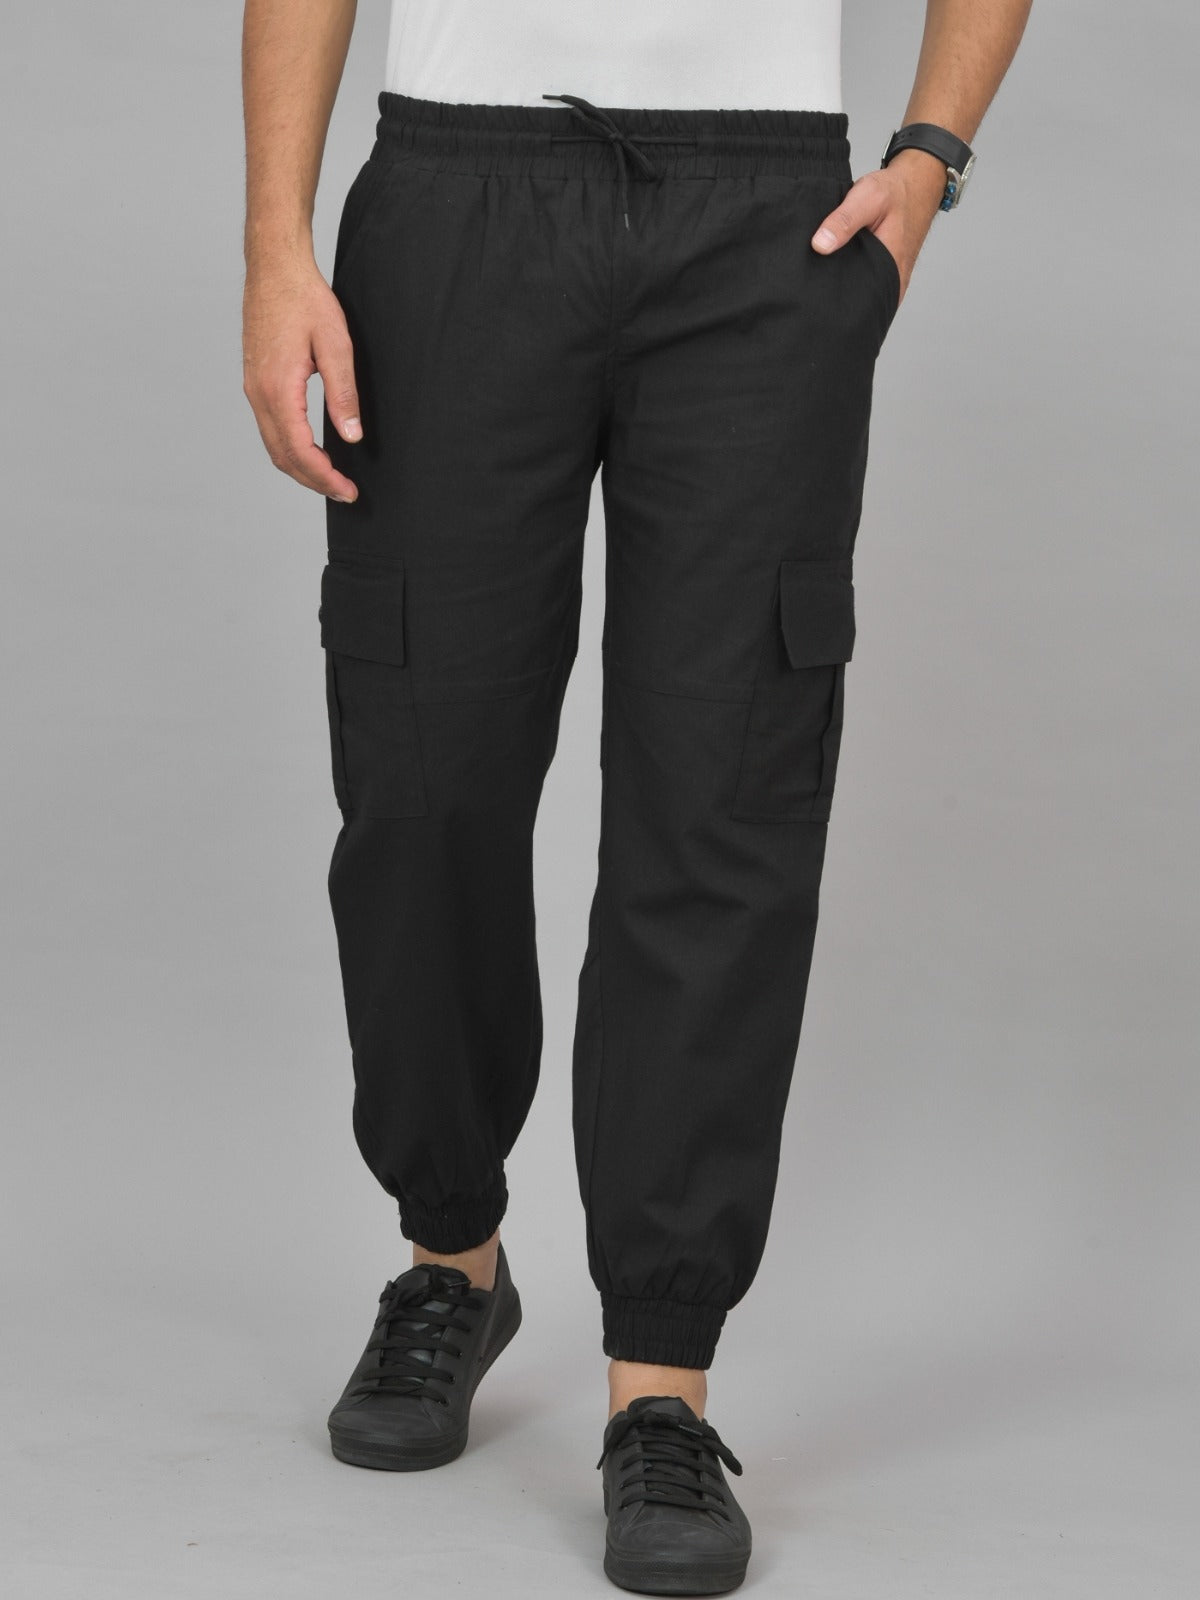 Combo Pack Of Mens Black And Grey Five Pocket Cotton Cargo Pants